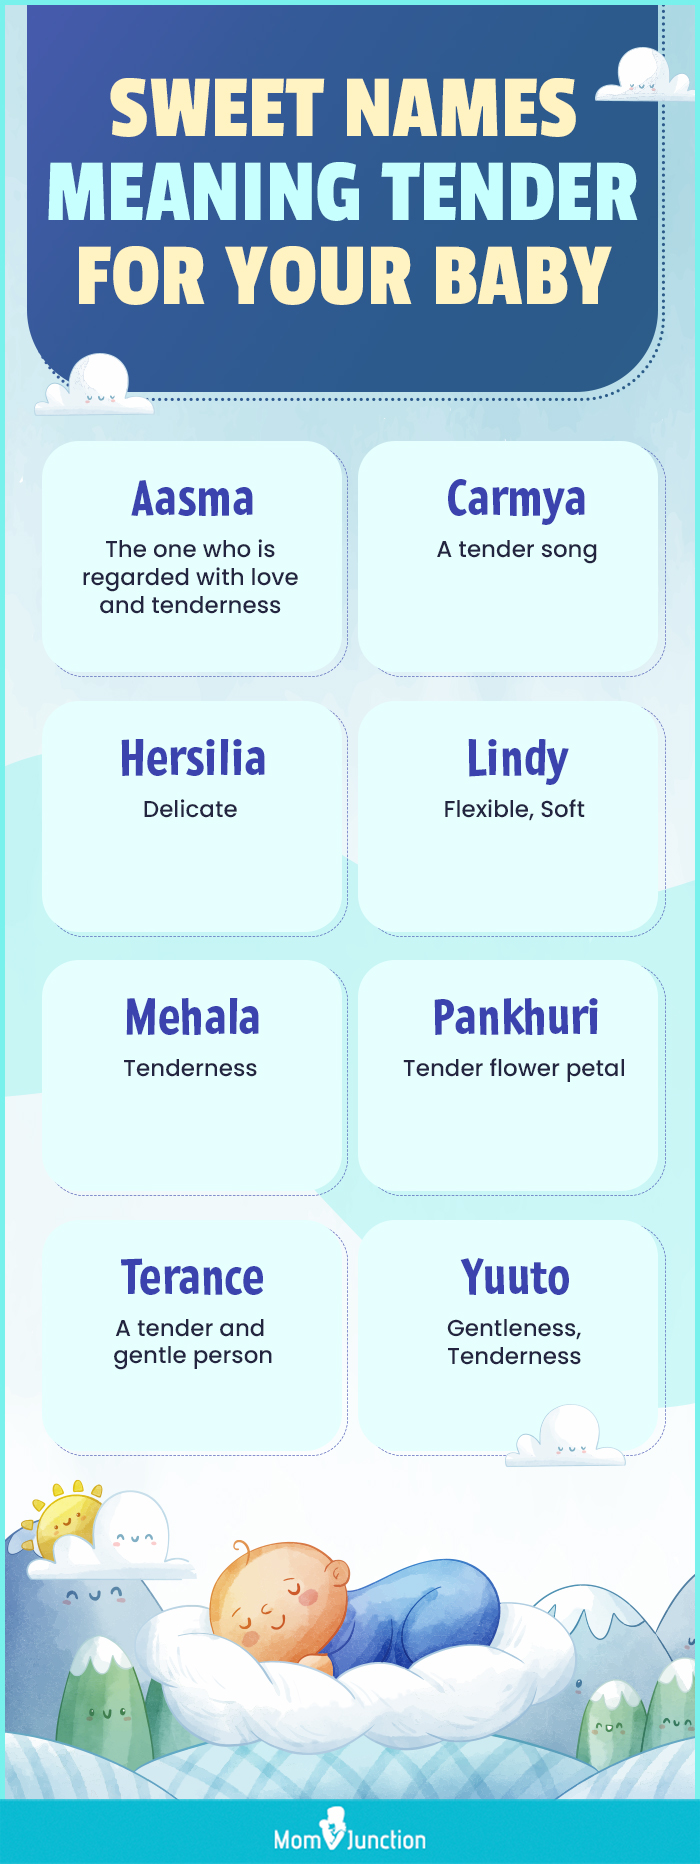 Sweet Names Meaning Tender For Your Baby (infographic)